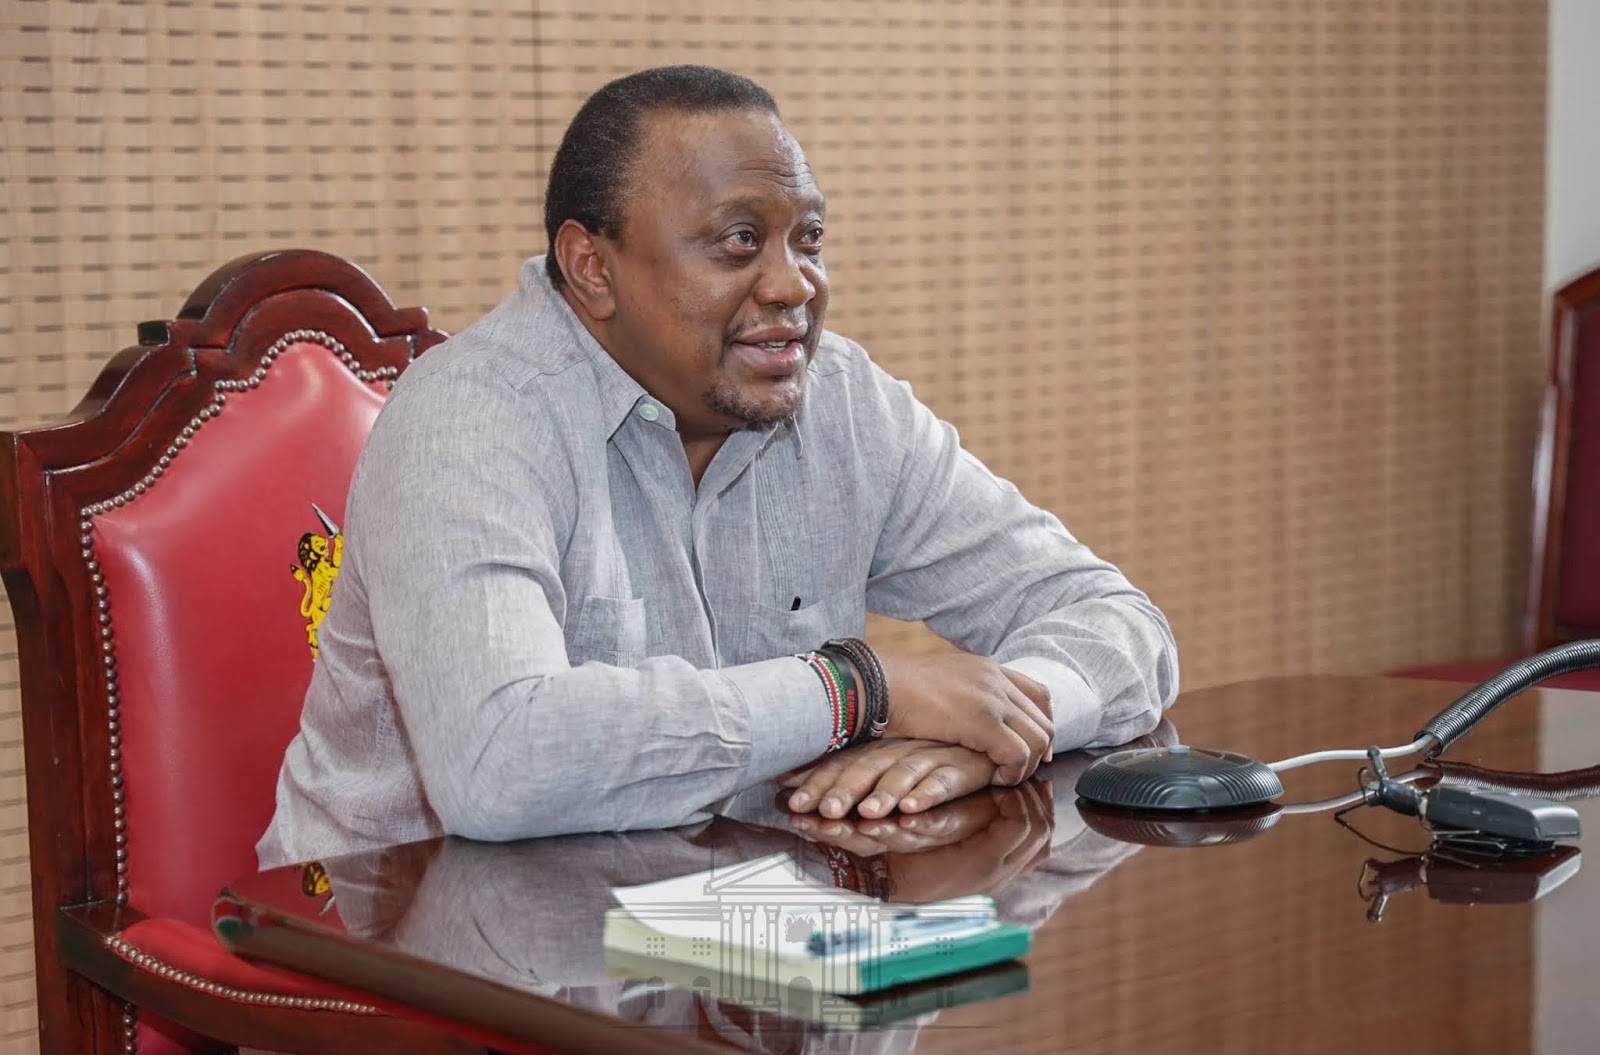 Cabinet Reshuffle in the Offing as UHURU Sends His Entire Cabinet, including CSs, PSs and CASs, on Forced Leave to Allow Him Time to Reorganize His Government